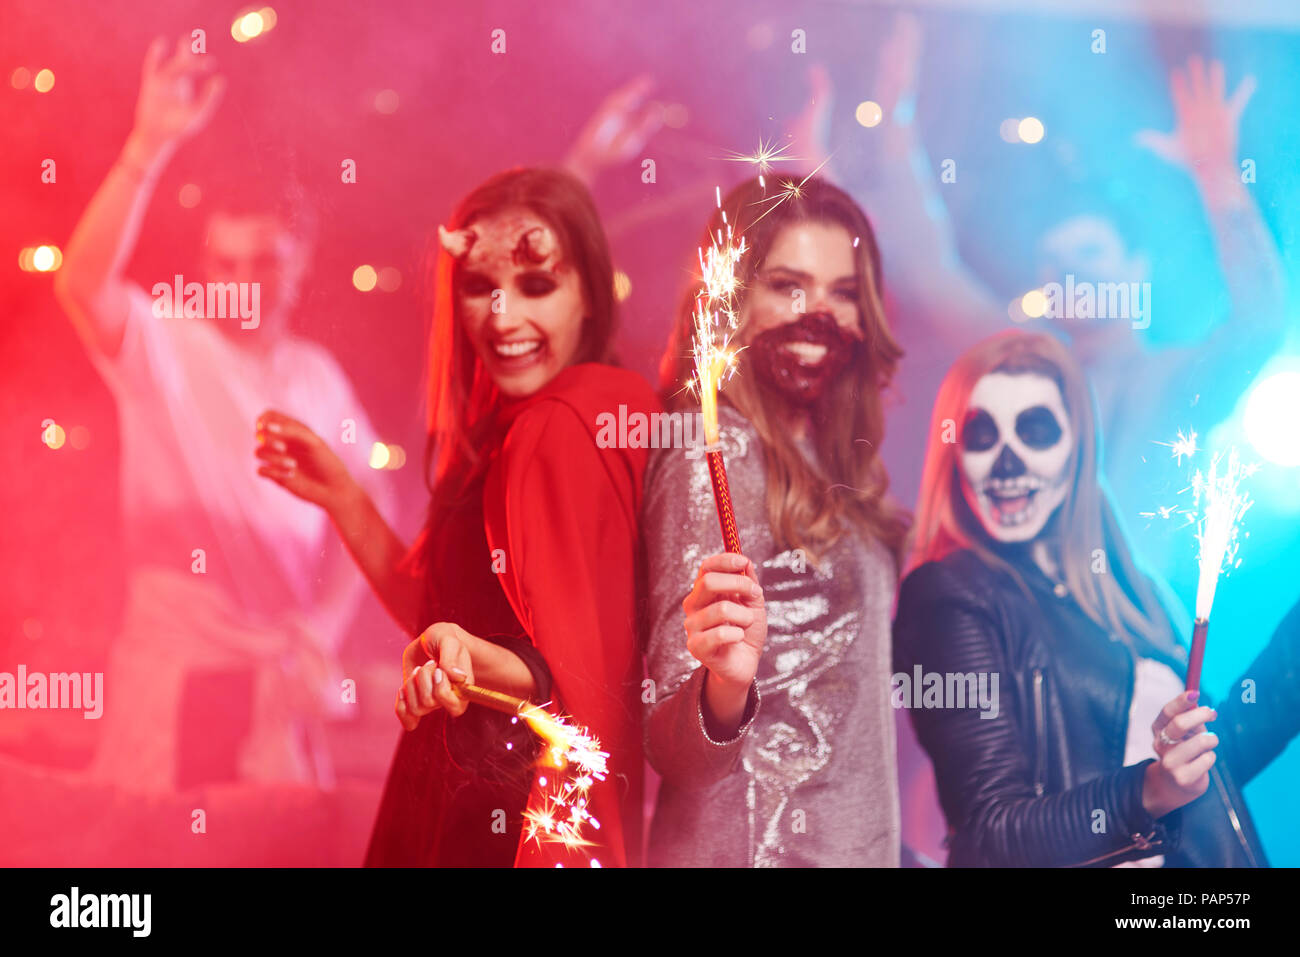 Friends in creepy costumes having fun at Halloween party Stock Photo